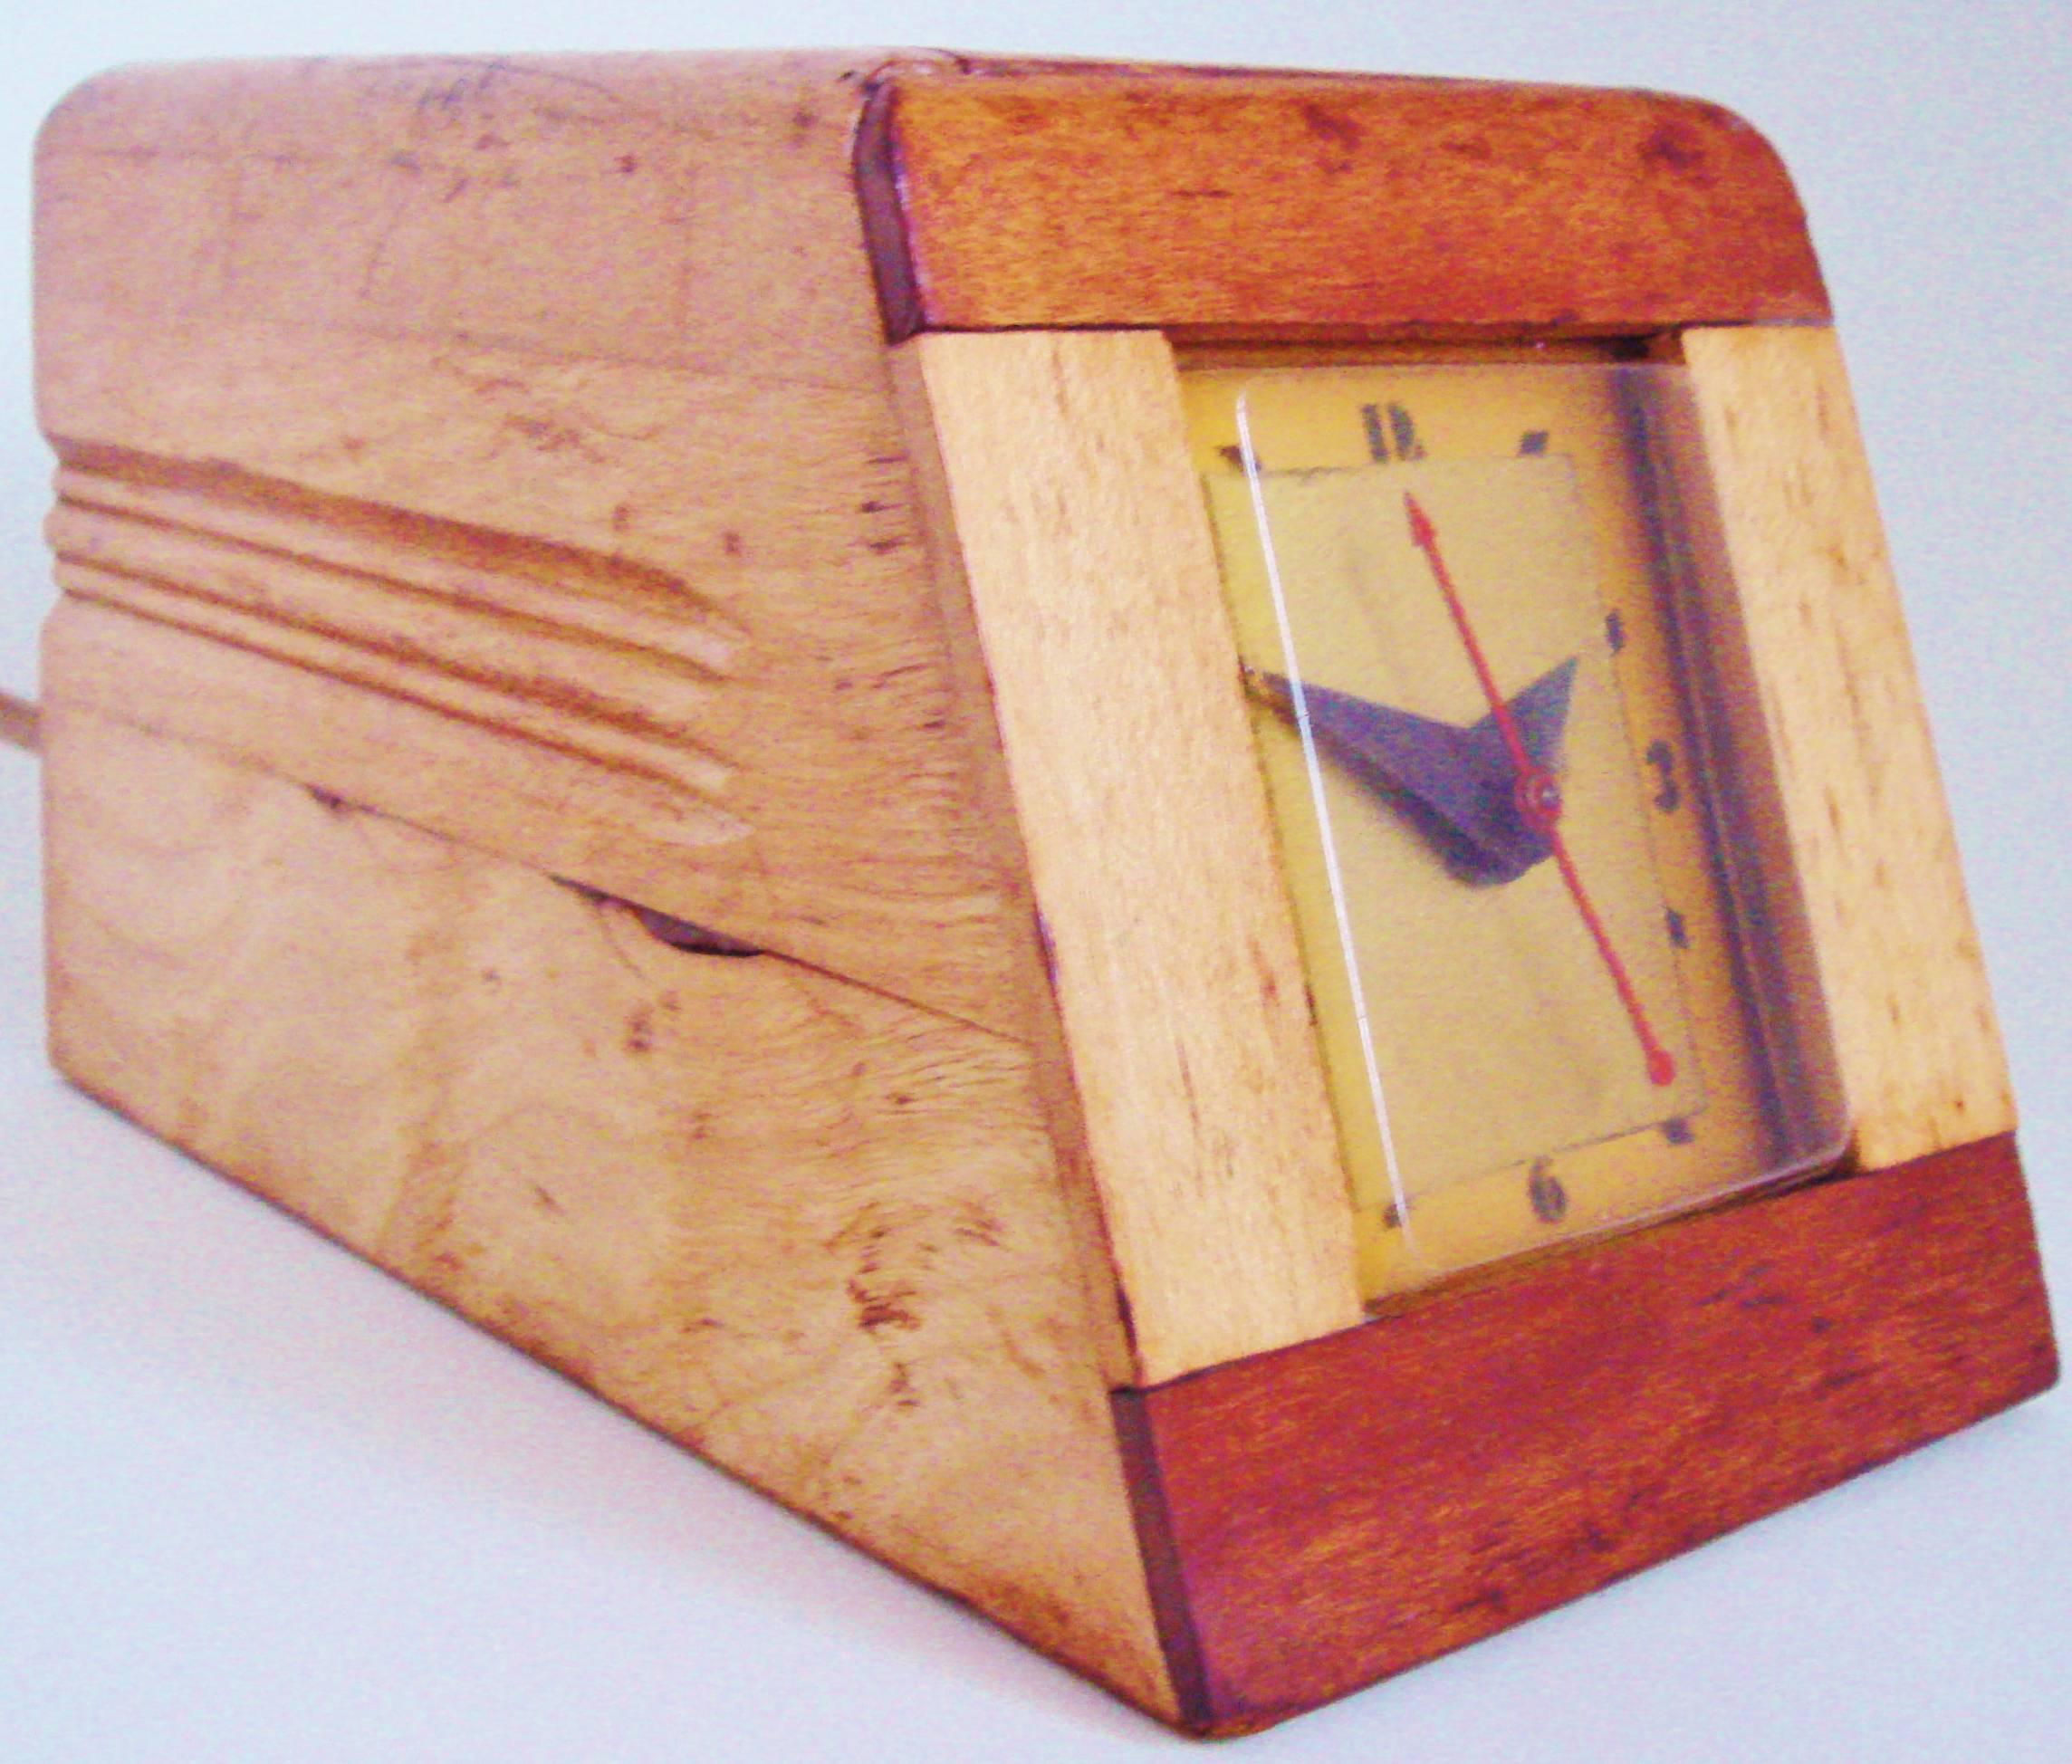 This rare American Art Deco Vgoue precision electric clock was manufactured in 1945 by the precision instrument firm of Gray Research & Development Labs of Bristol Connecticut. (The name Vgoue is correct and not a typo by Decollect!) The